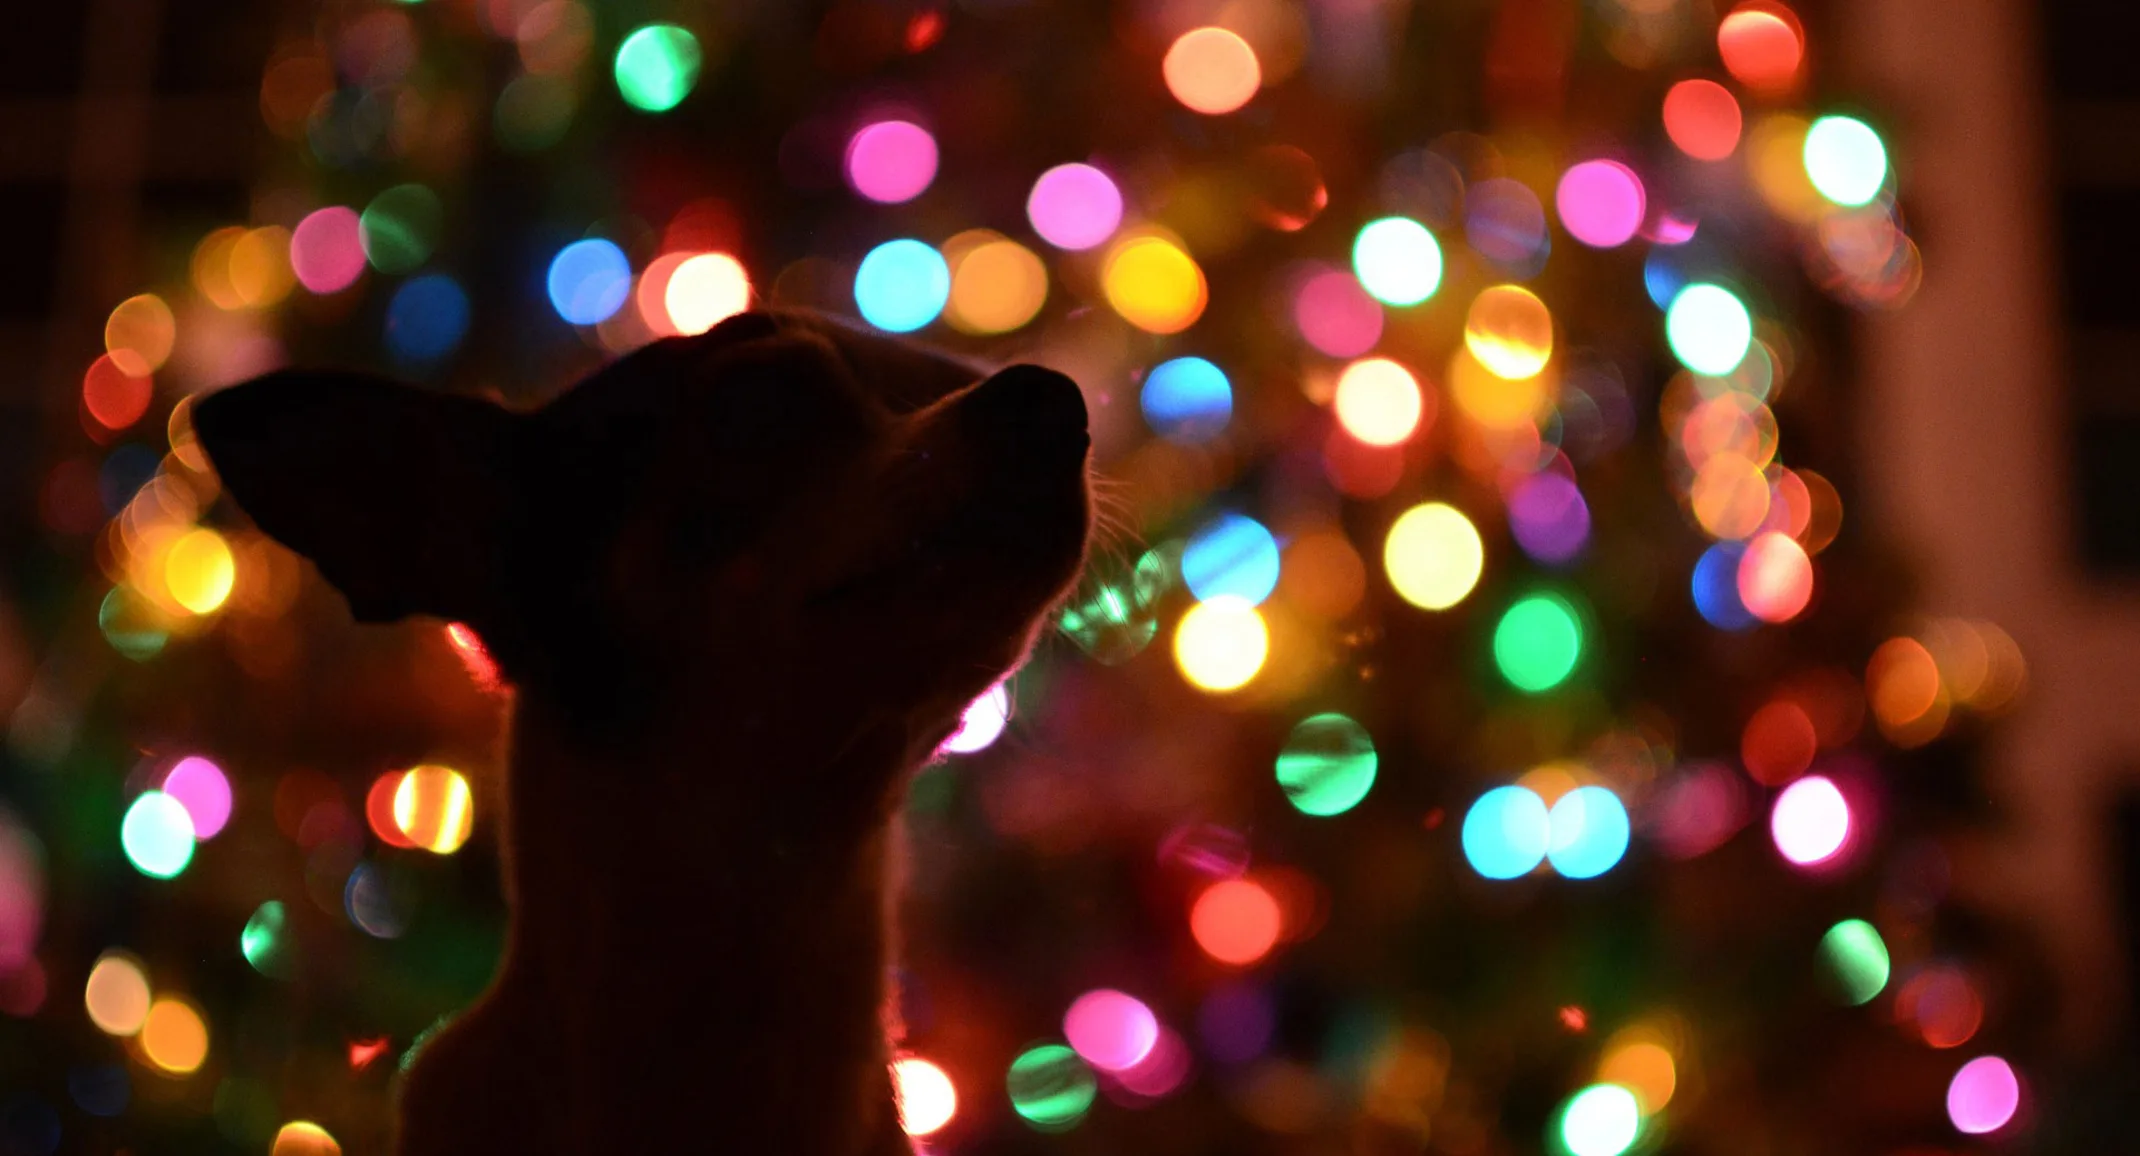 dog silhouette with holiday lights